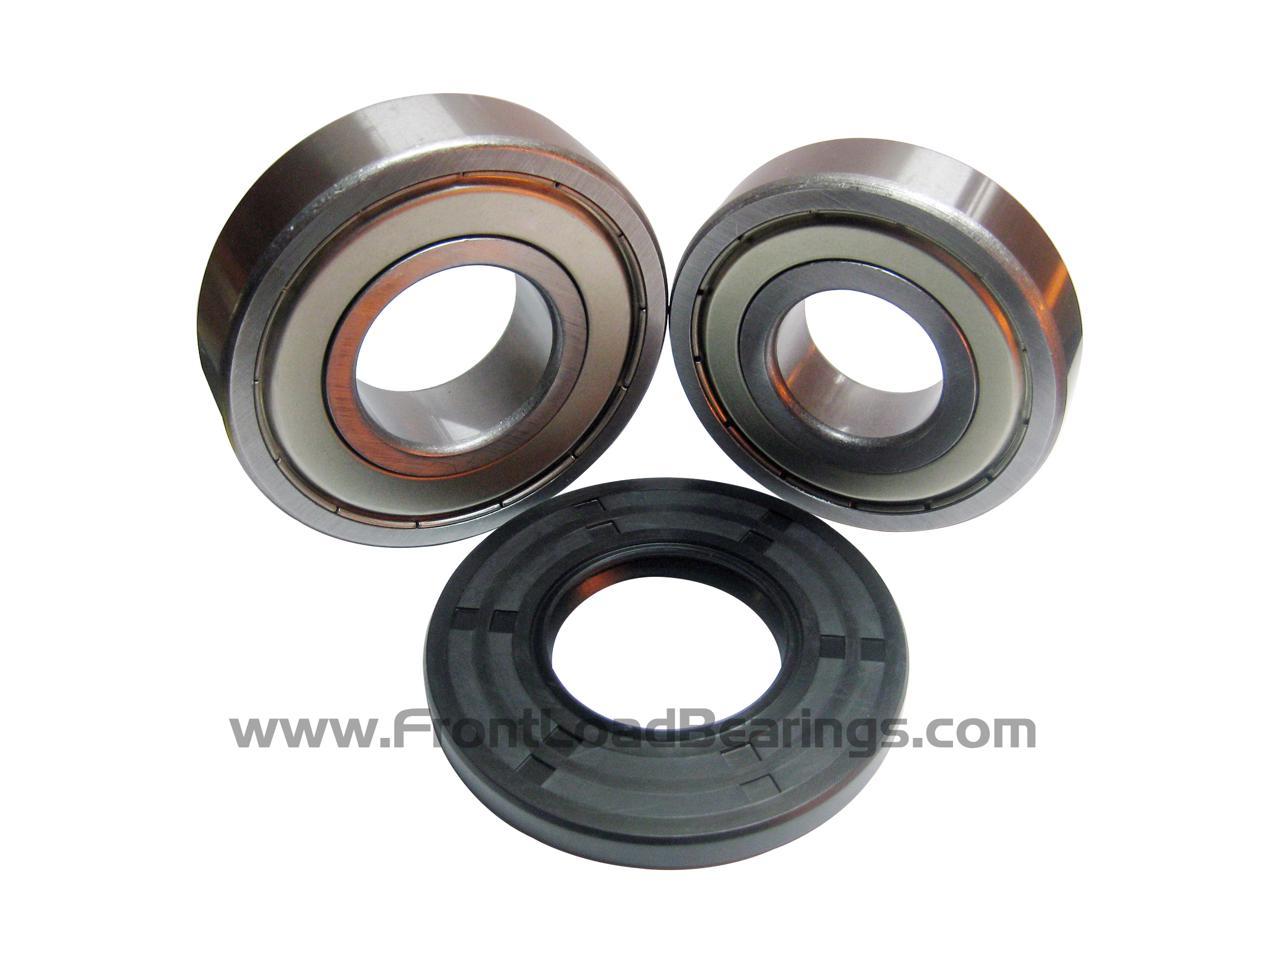 131525500 Front Load Washer Tub Bearings and Seal Kit For Kenmore,Frigidaire etc